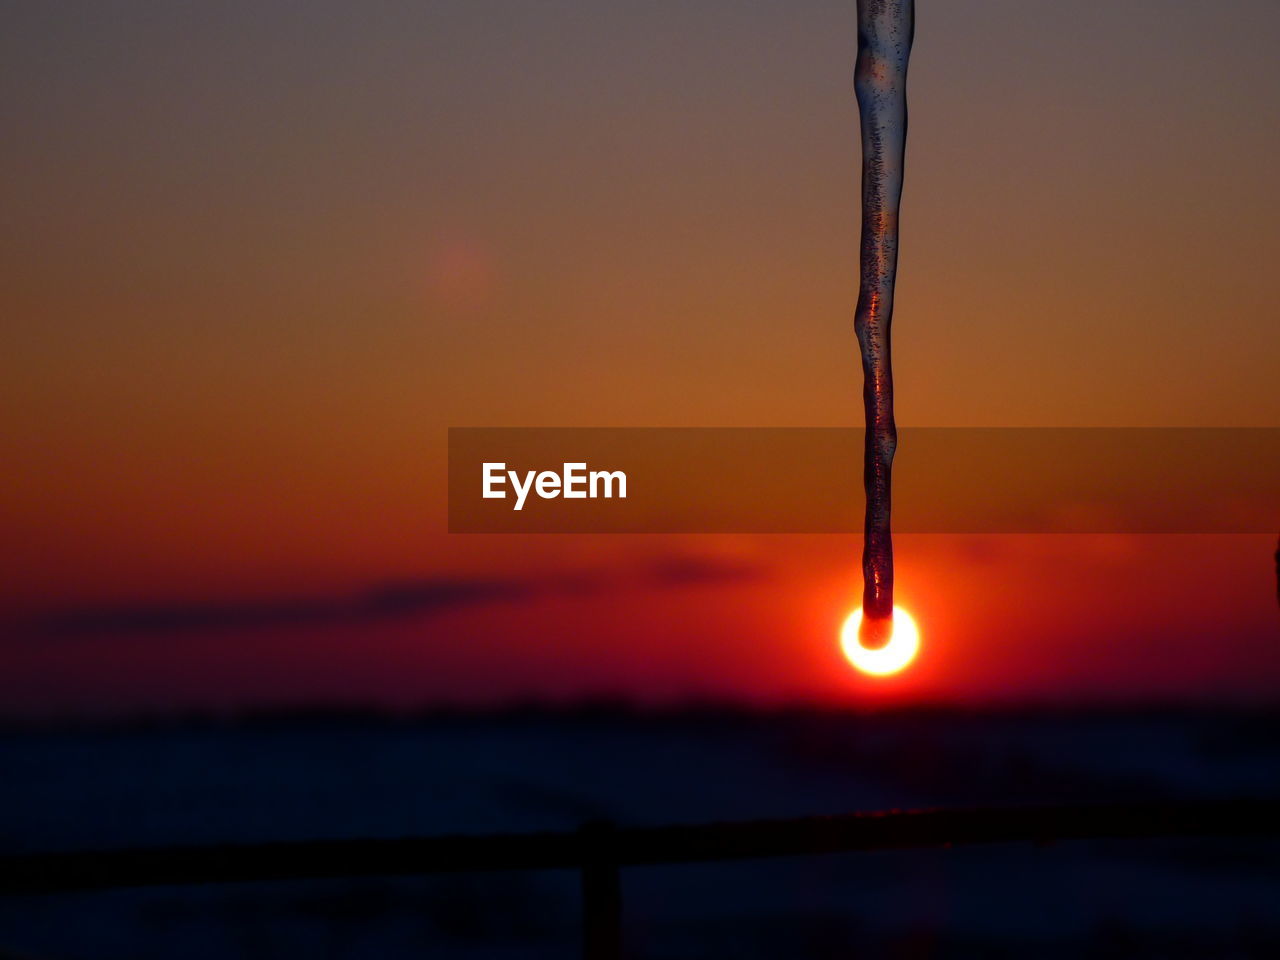 CLOSE-UP OF ICICLES AGAINST ORANGE SUNSET SKY